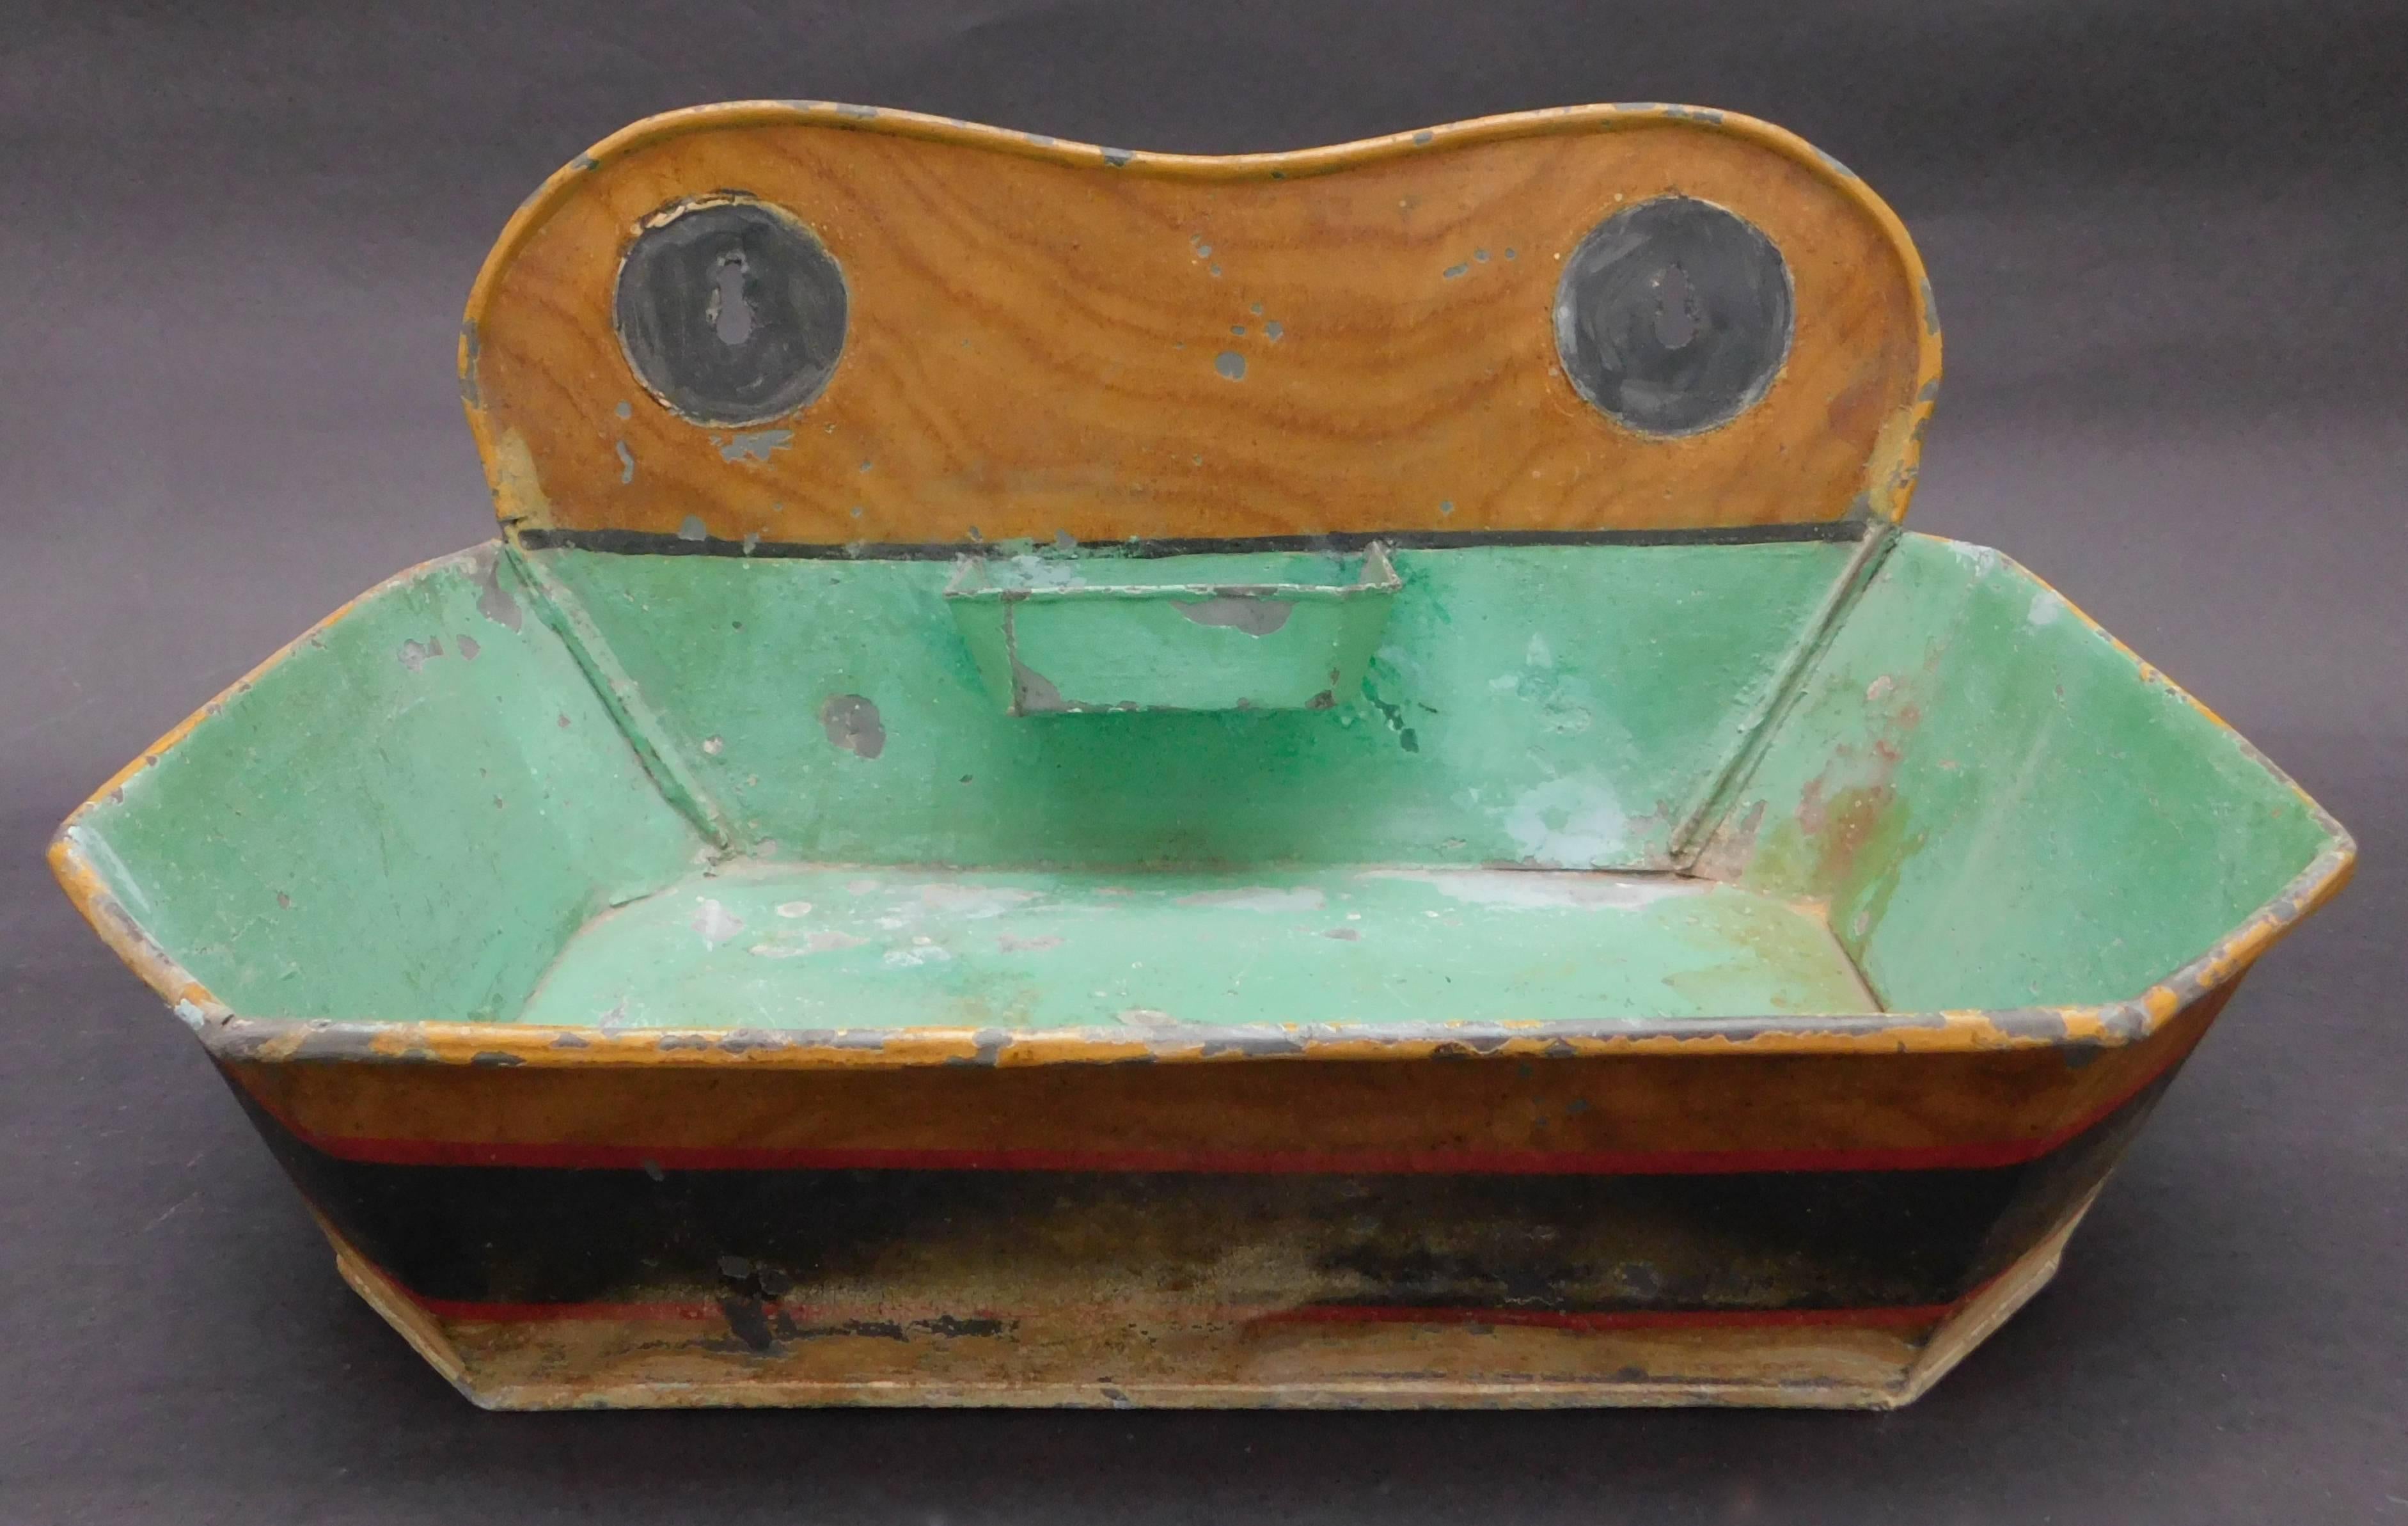 Painted tin (tole) sink retaining the original paint and soap bar holder. This would be an eye catching piece hung on the wall and filled with plants. Belgian, circa 1860.